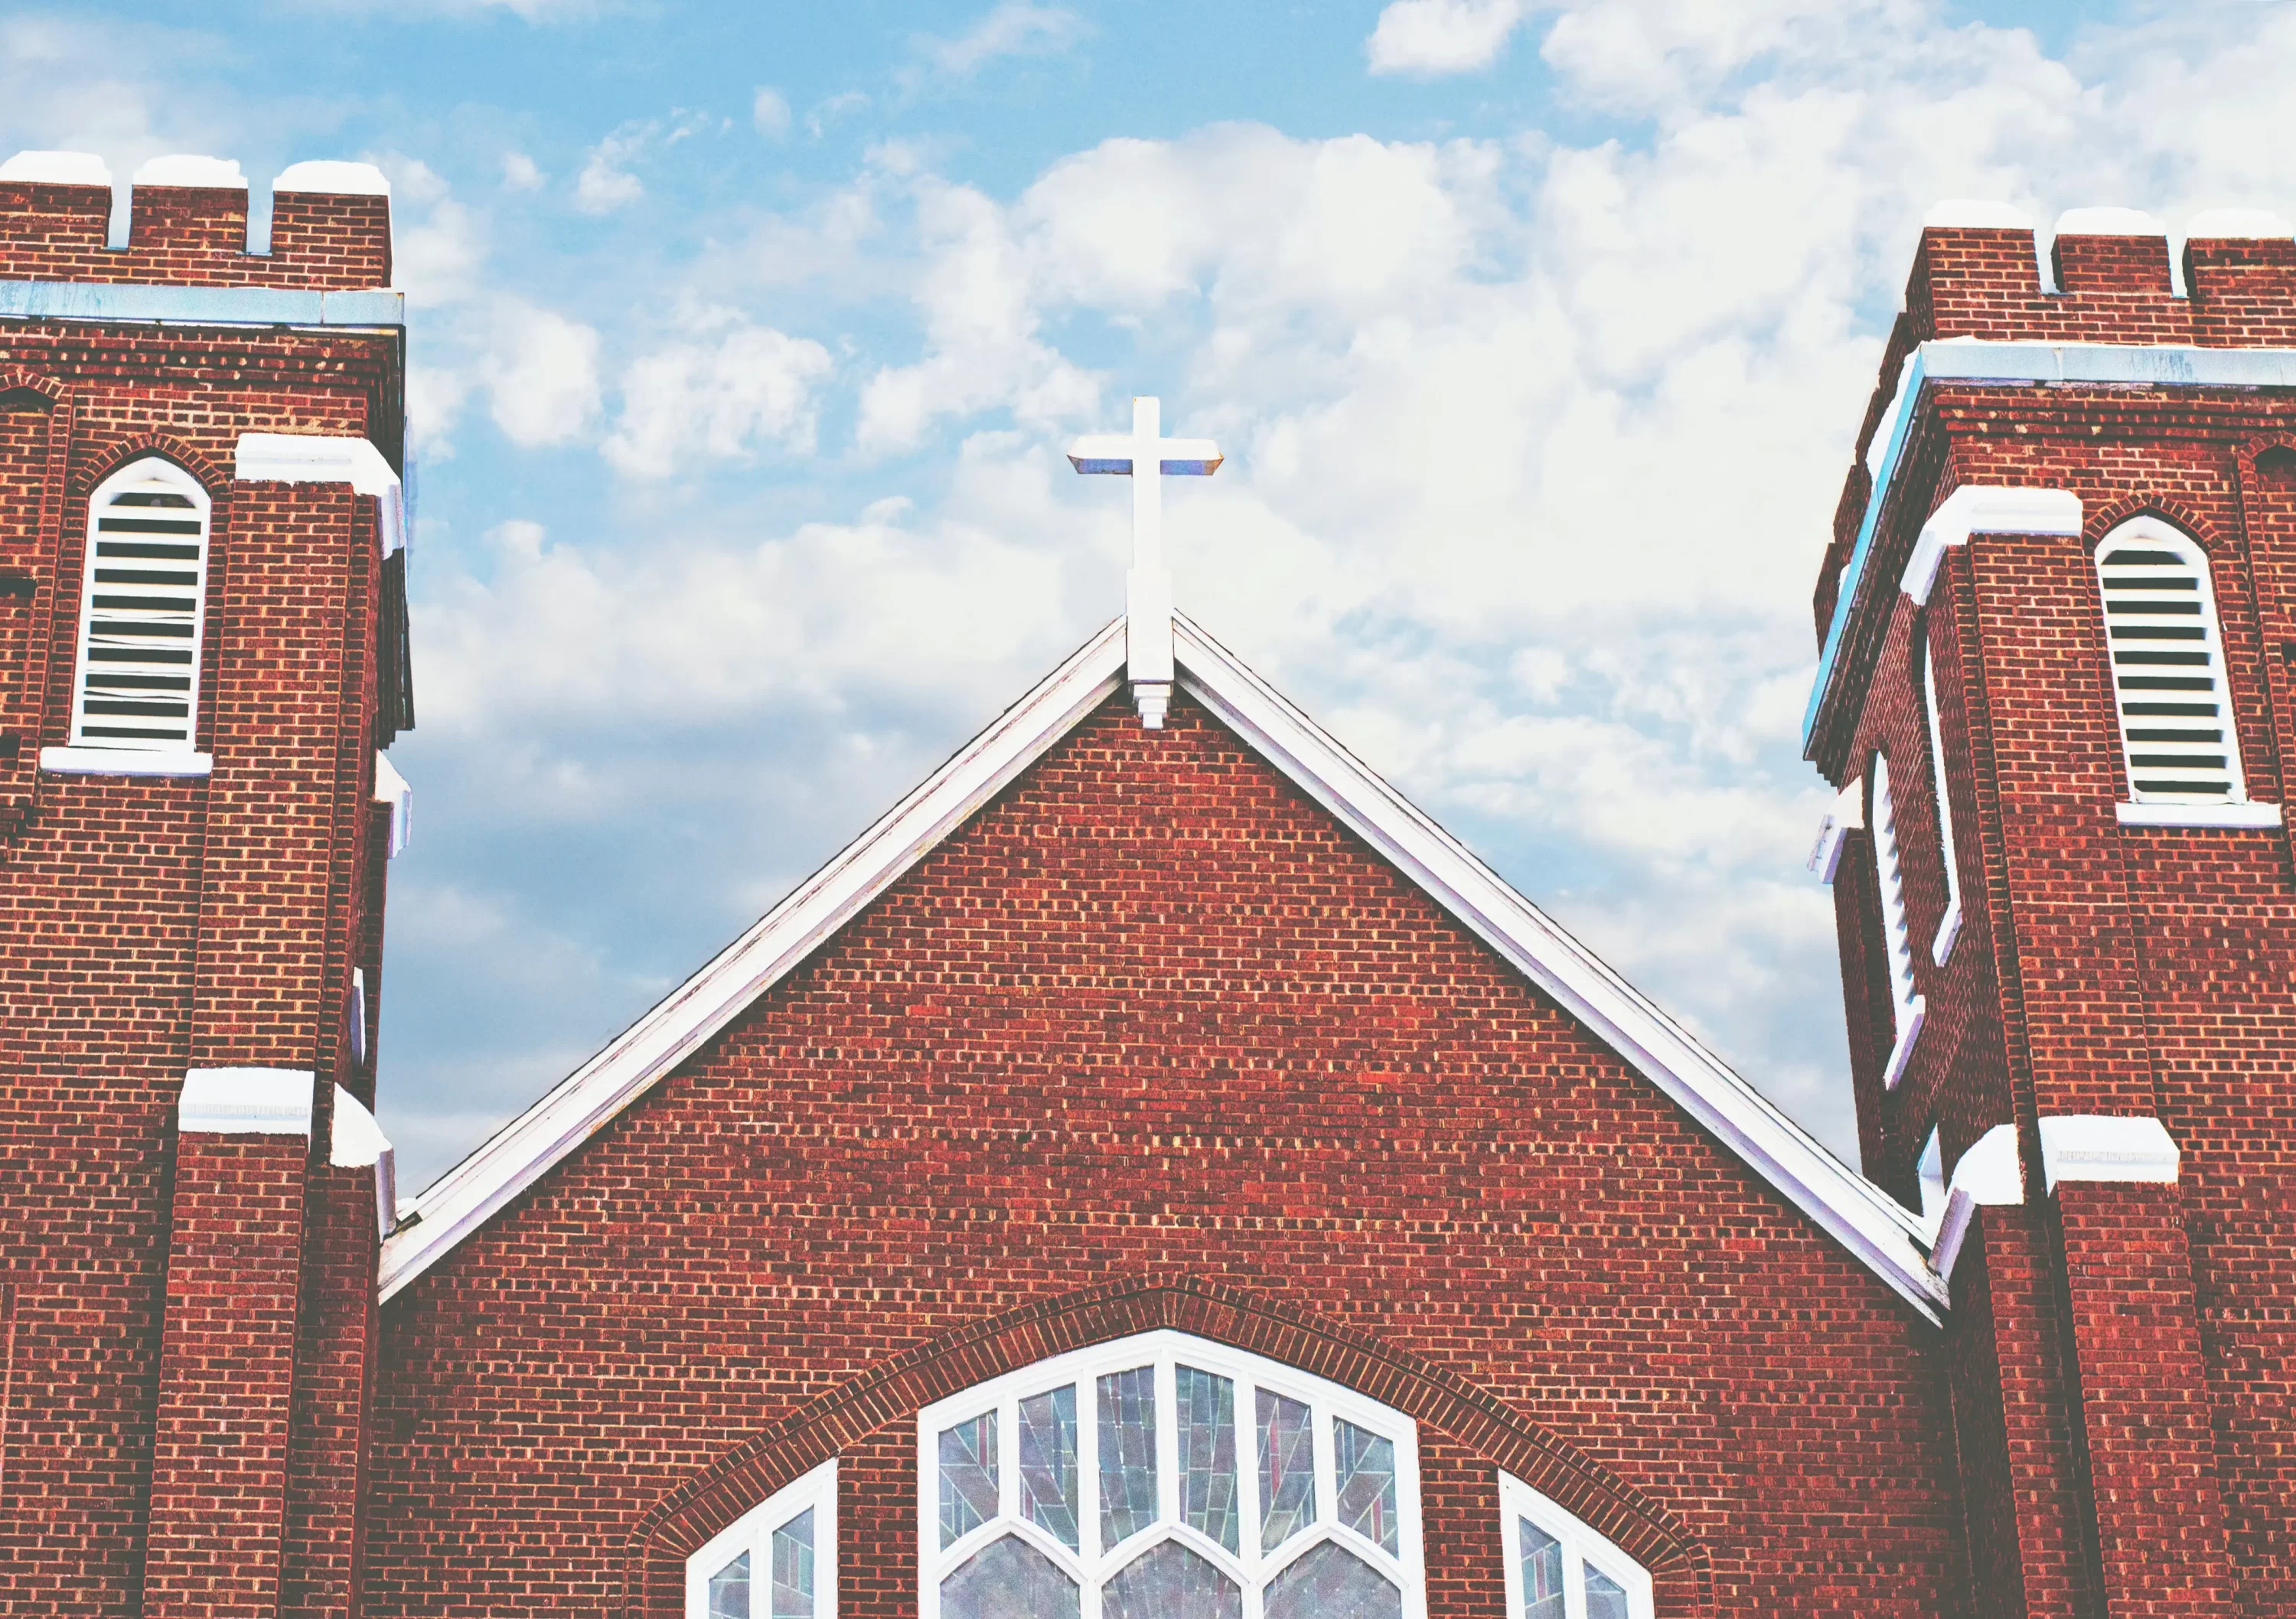 Red Brick Church with Cross on Roof